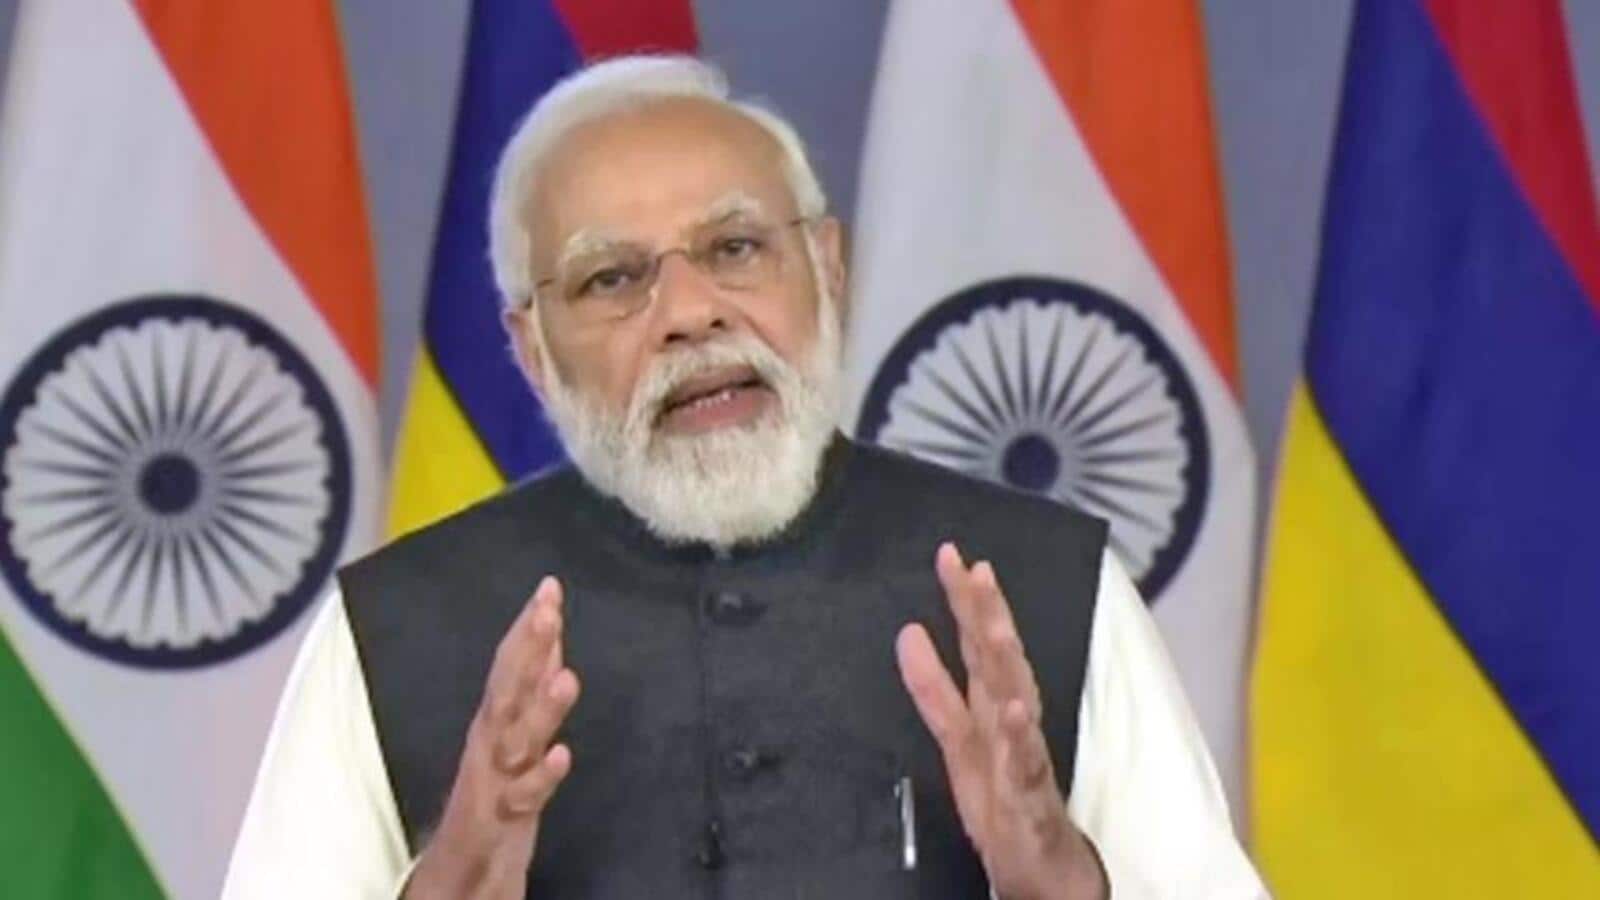 While giving his speech at the event, India PM Narendra Modi said that India’s assistance programmes were driven by the “needs and priorities” of its allies, while ensuring respect to the country’s sovereignty.